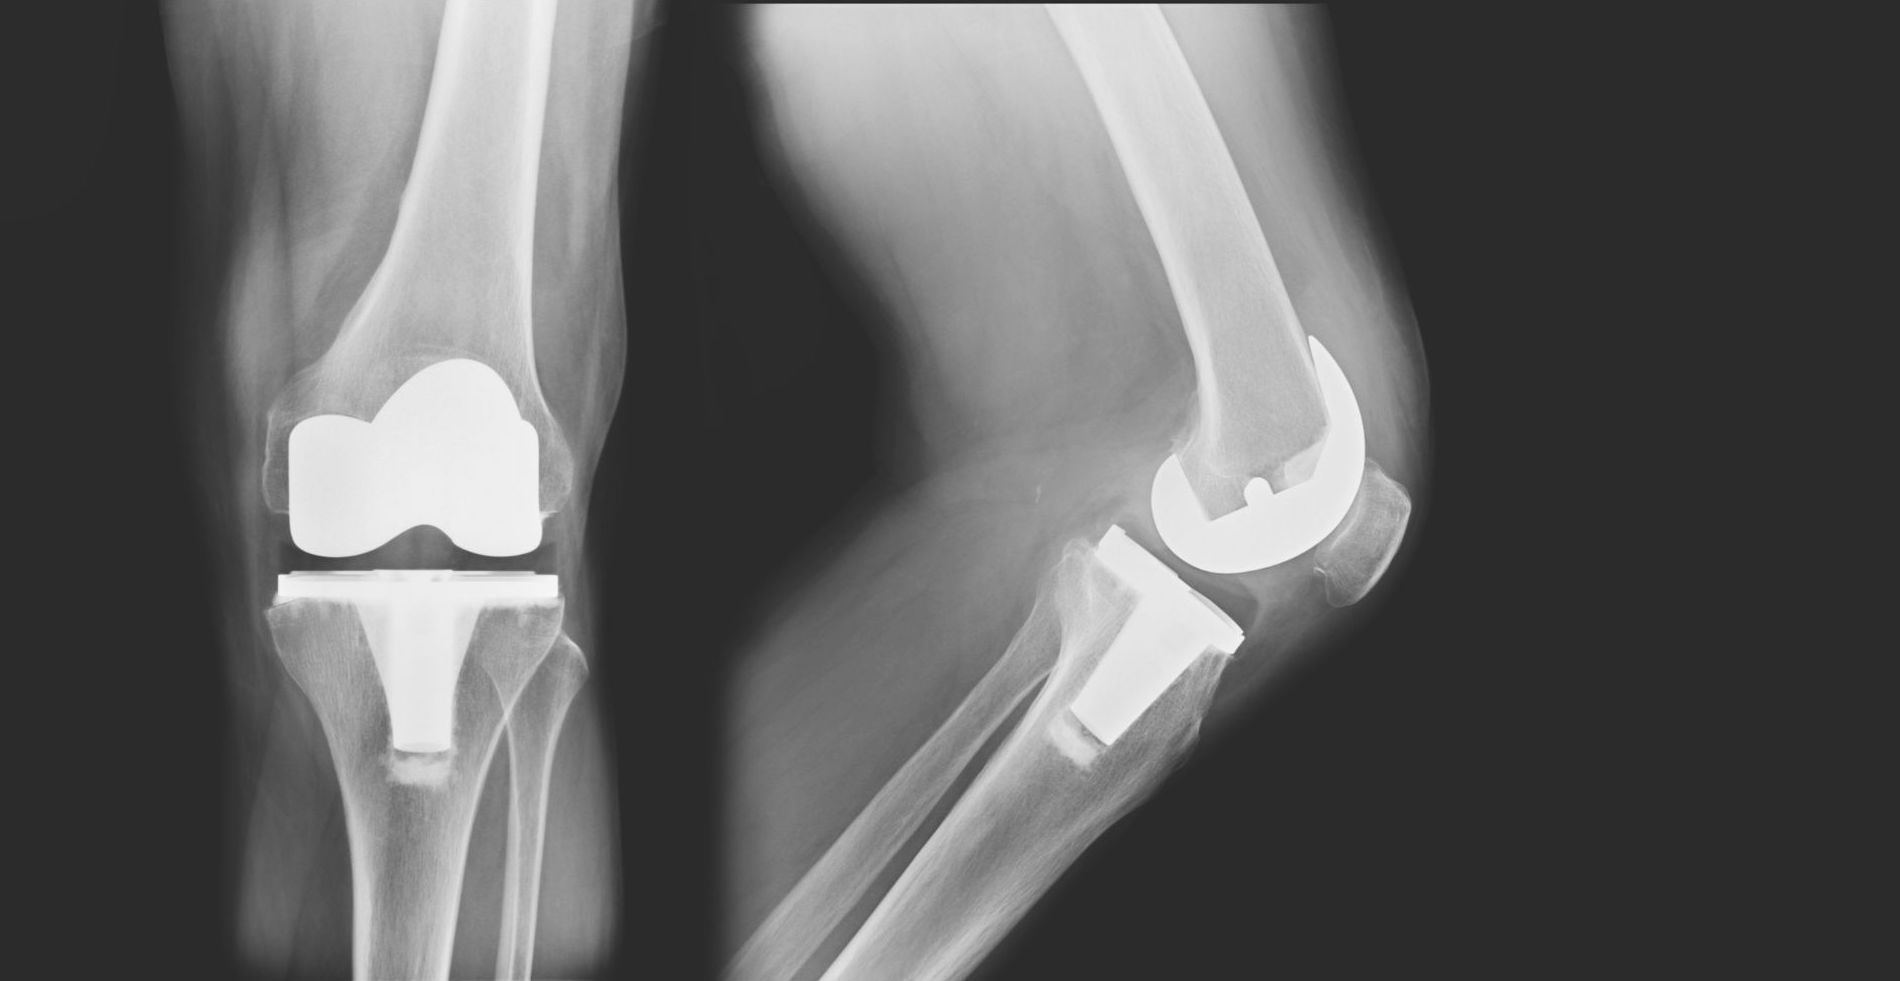 Study Finds 26% Of Knee Replacements Are Premature